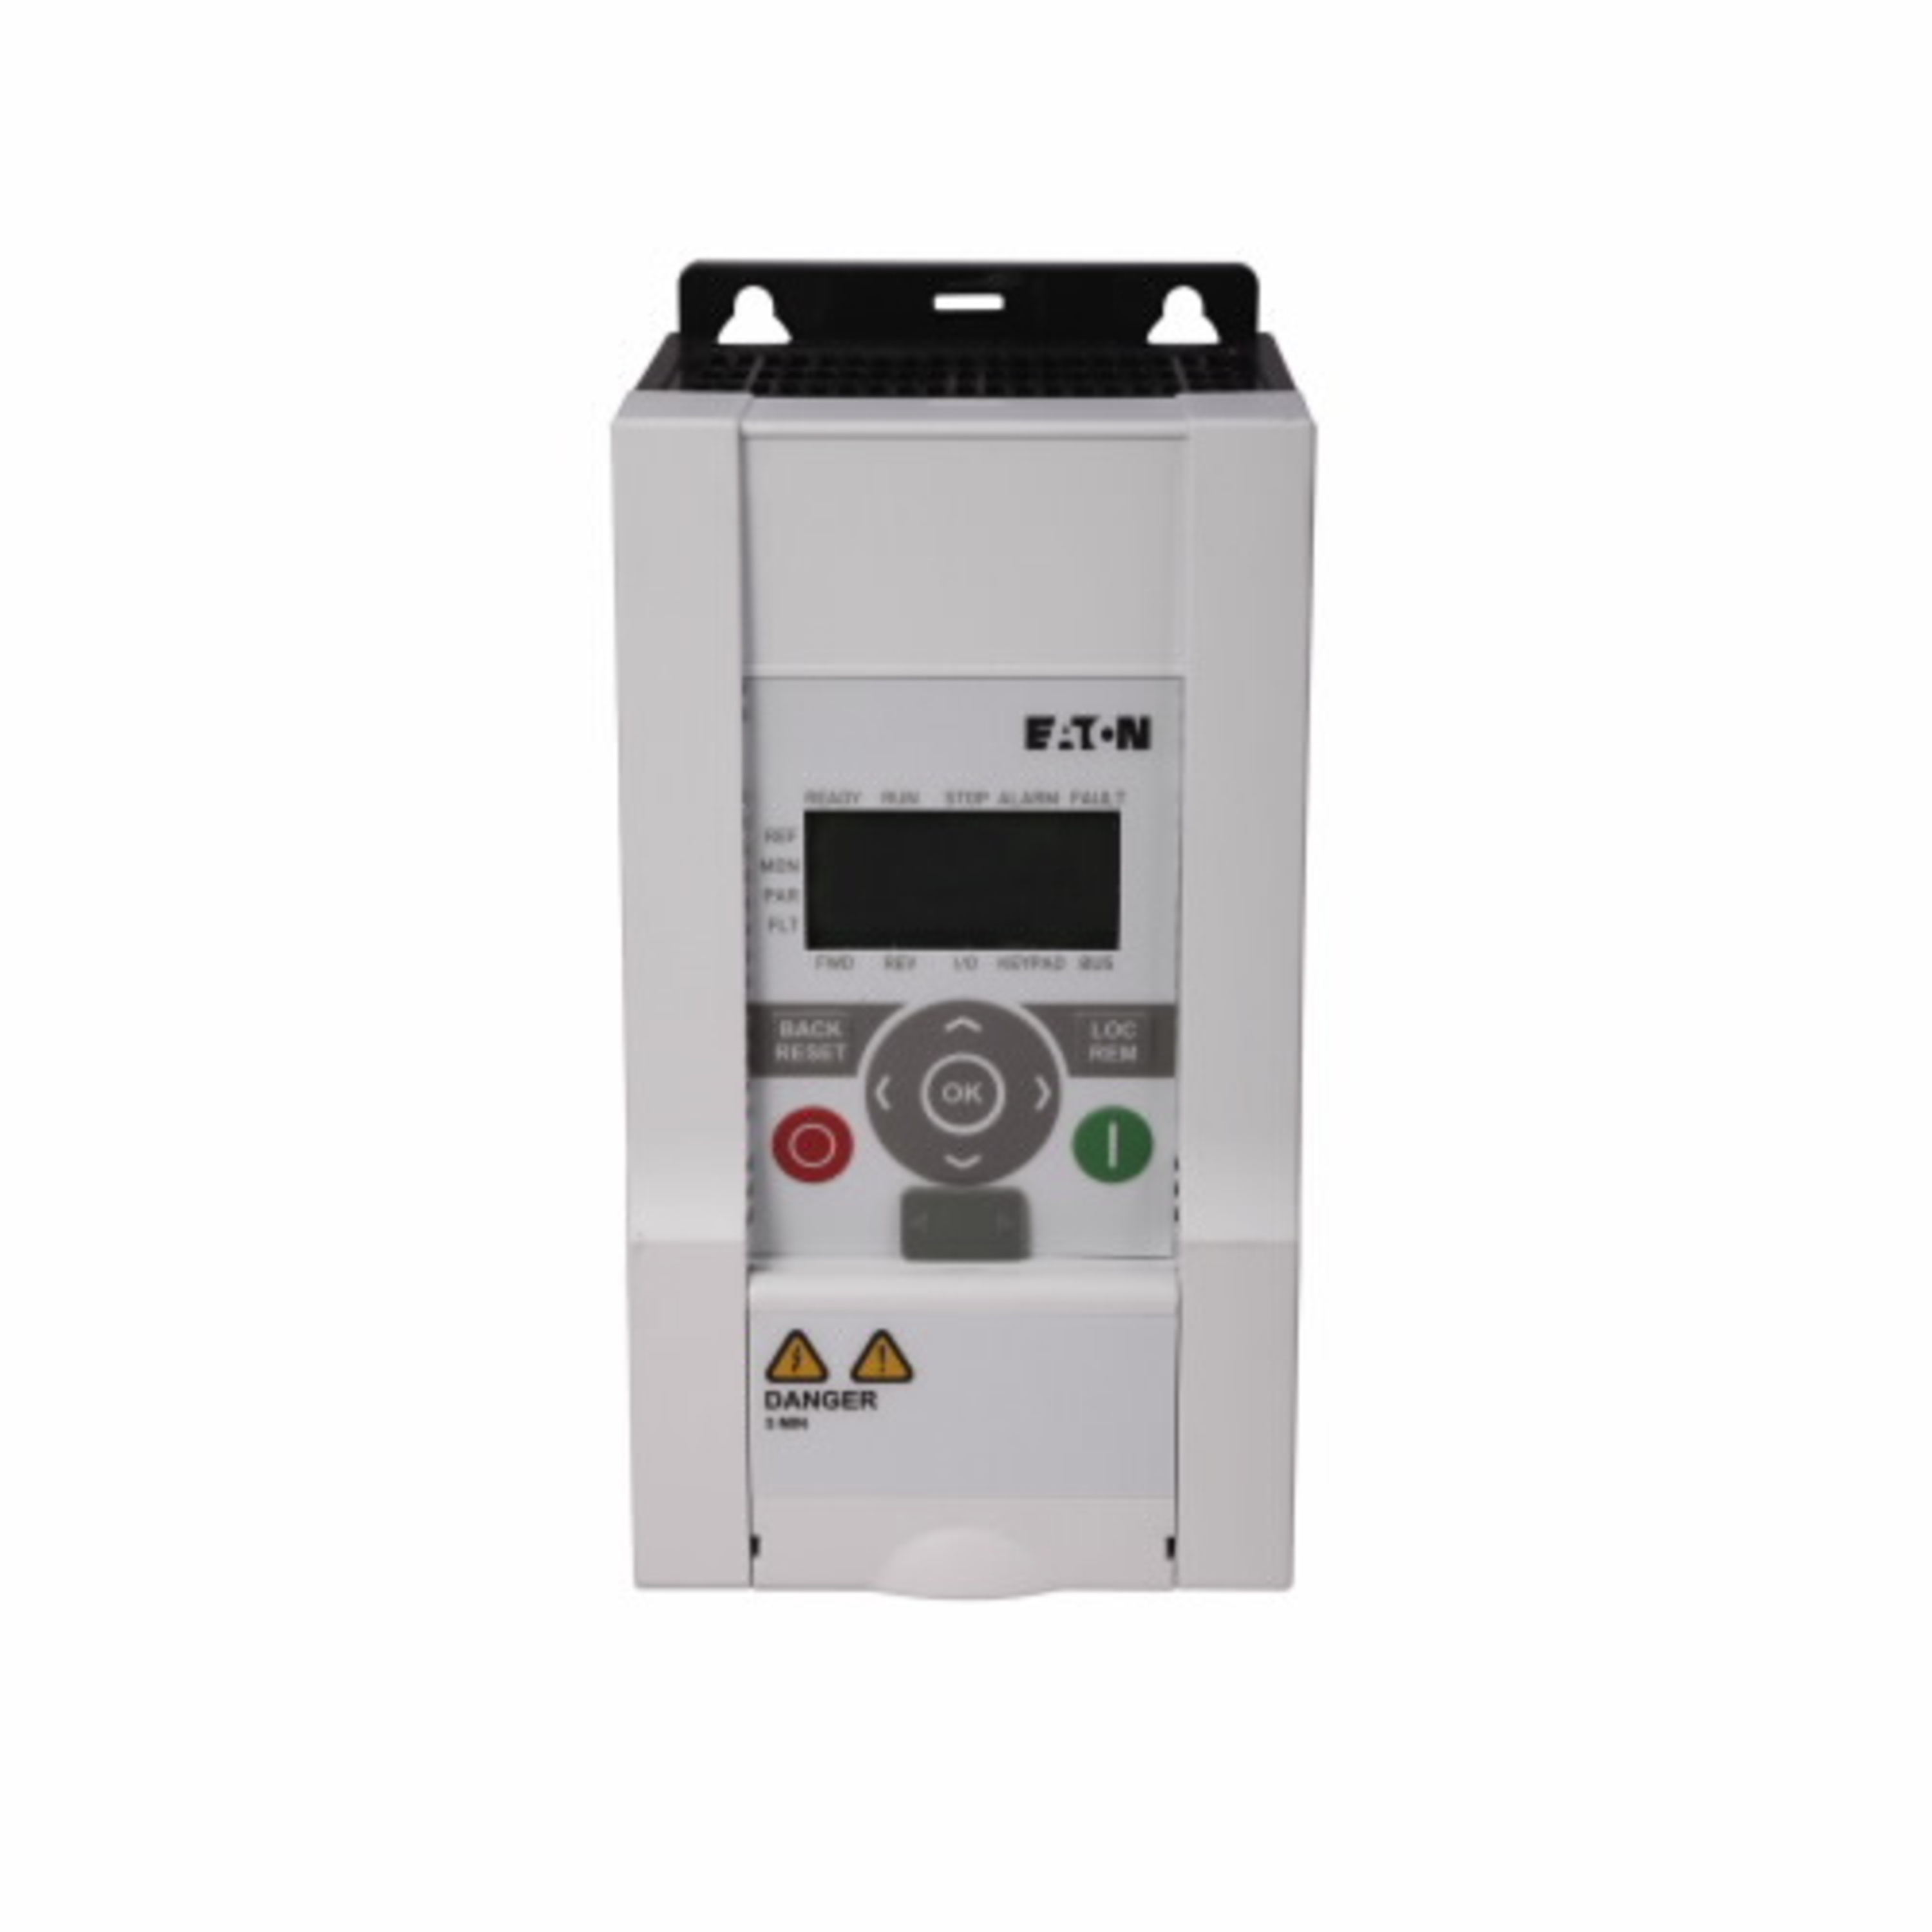 Eaton MMX11AA2D8N0-0 Eaton | Cutler Hammer MMX11AA2D8N0-0  Variable Frequency Drives AC Drives – 240VAC – 1 Phase https://gesrepair.com/wp-content/uploads/2022/Eaton/Images/Eaton_MMX11AA2D8N0-0_Variable_Frequency_Drive.jpg